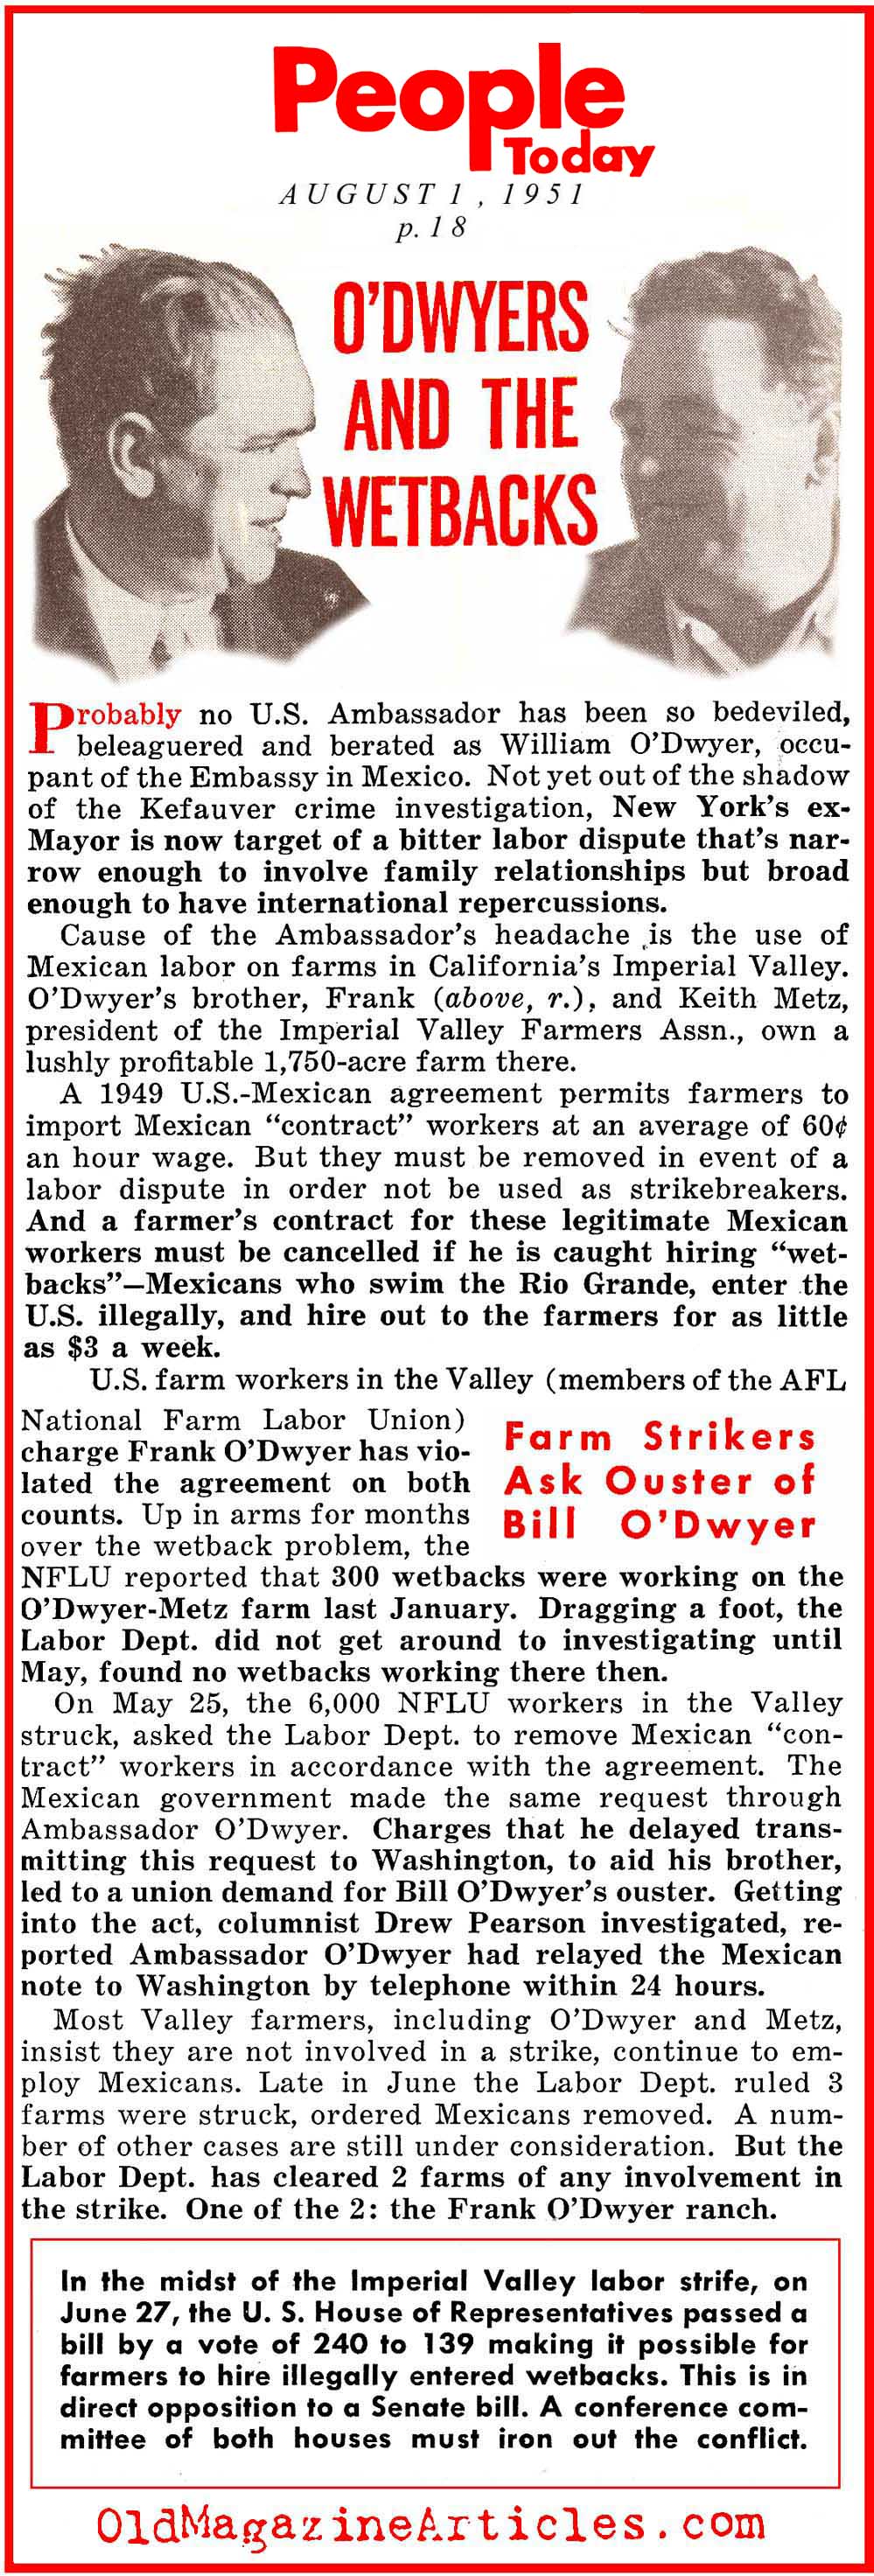 Congress OKs the Hiring of Illegal Farm Workers (People Today Magazine, 1951)